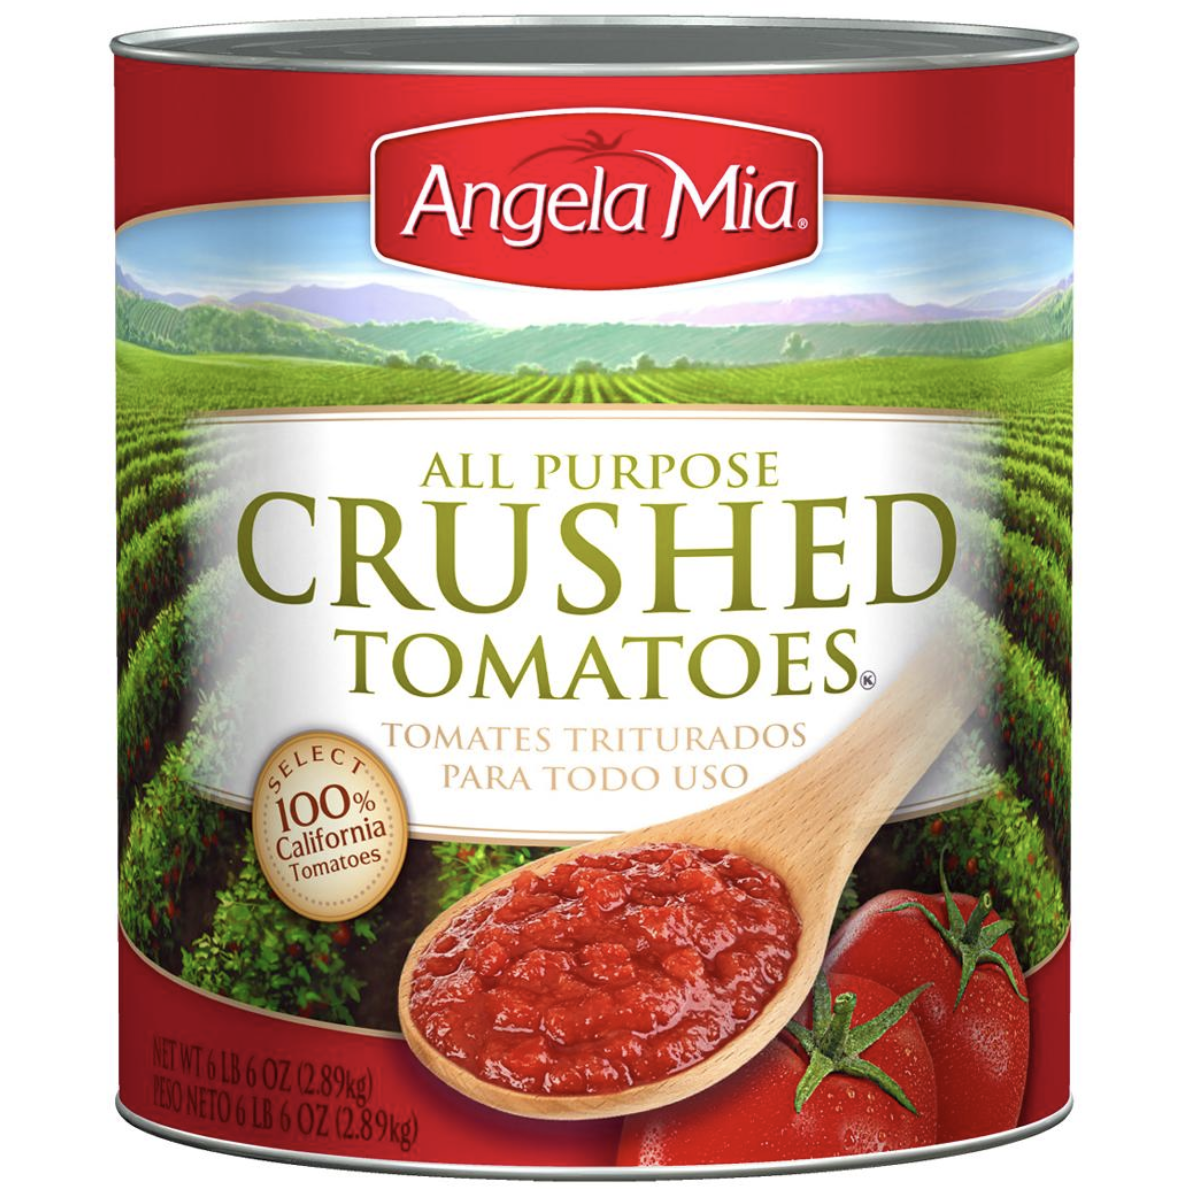 Angela Mia Concentrated Crushed Tomatoes, 102 oz.